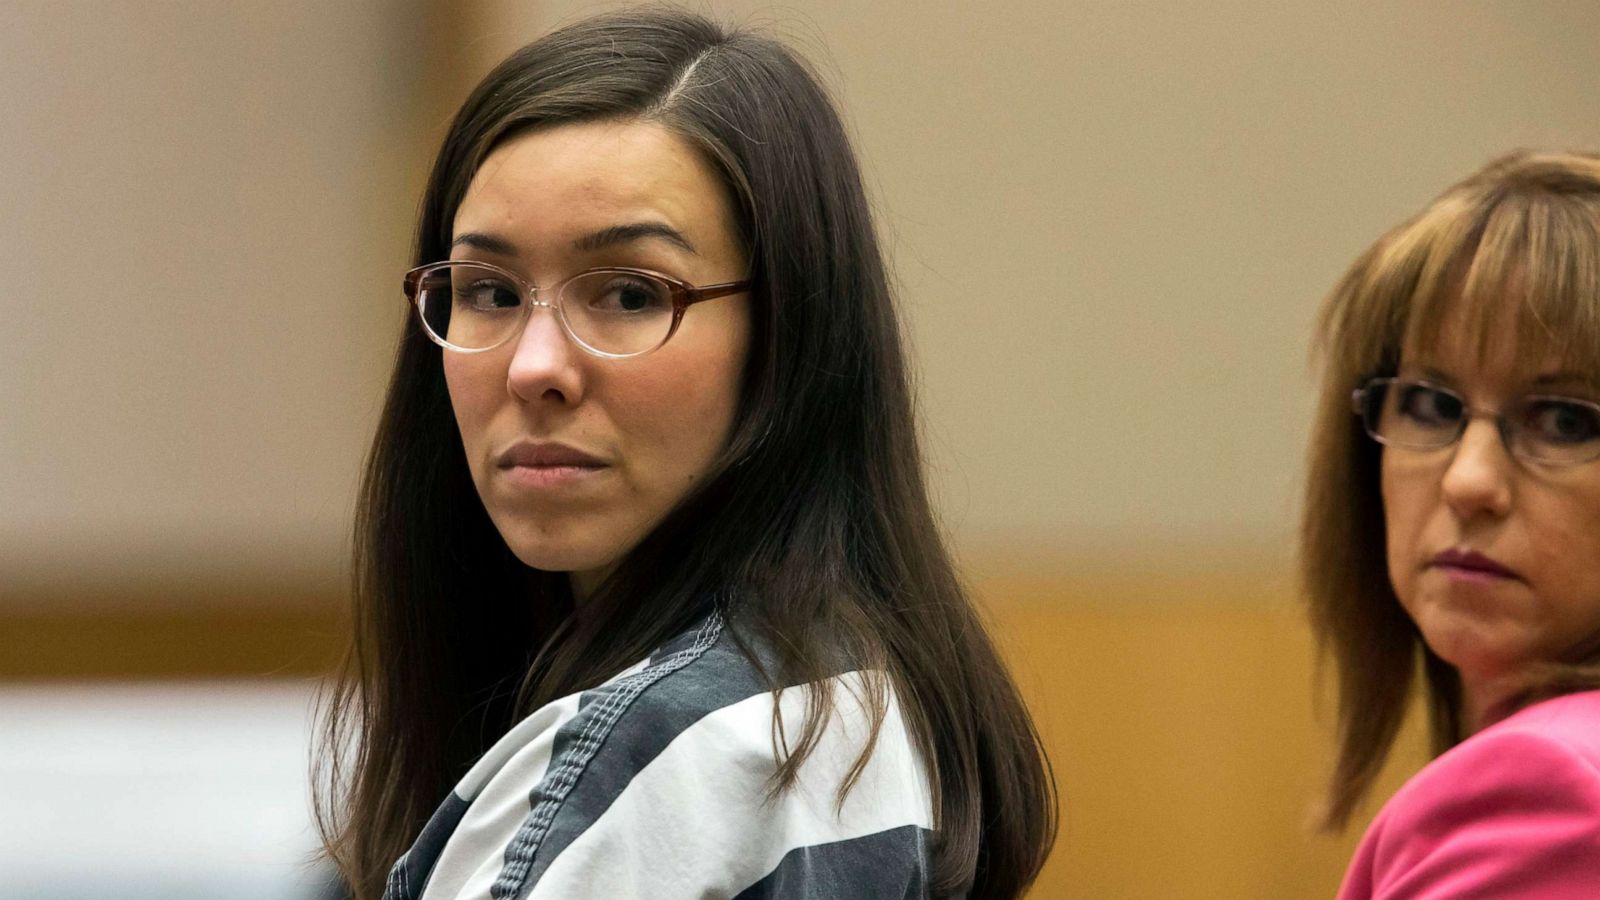 Friends say they warned Travis Alexander that Jodi Arias was dangerous for months before she killed image